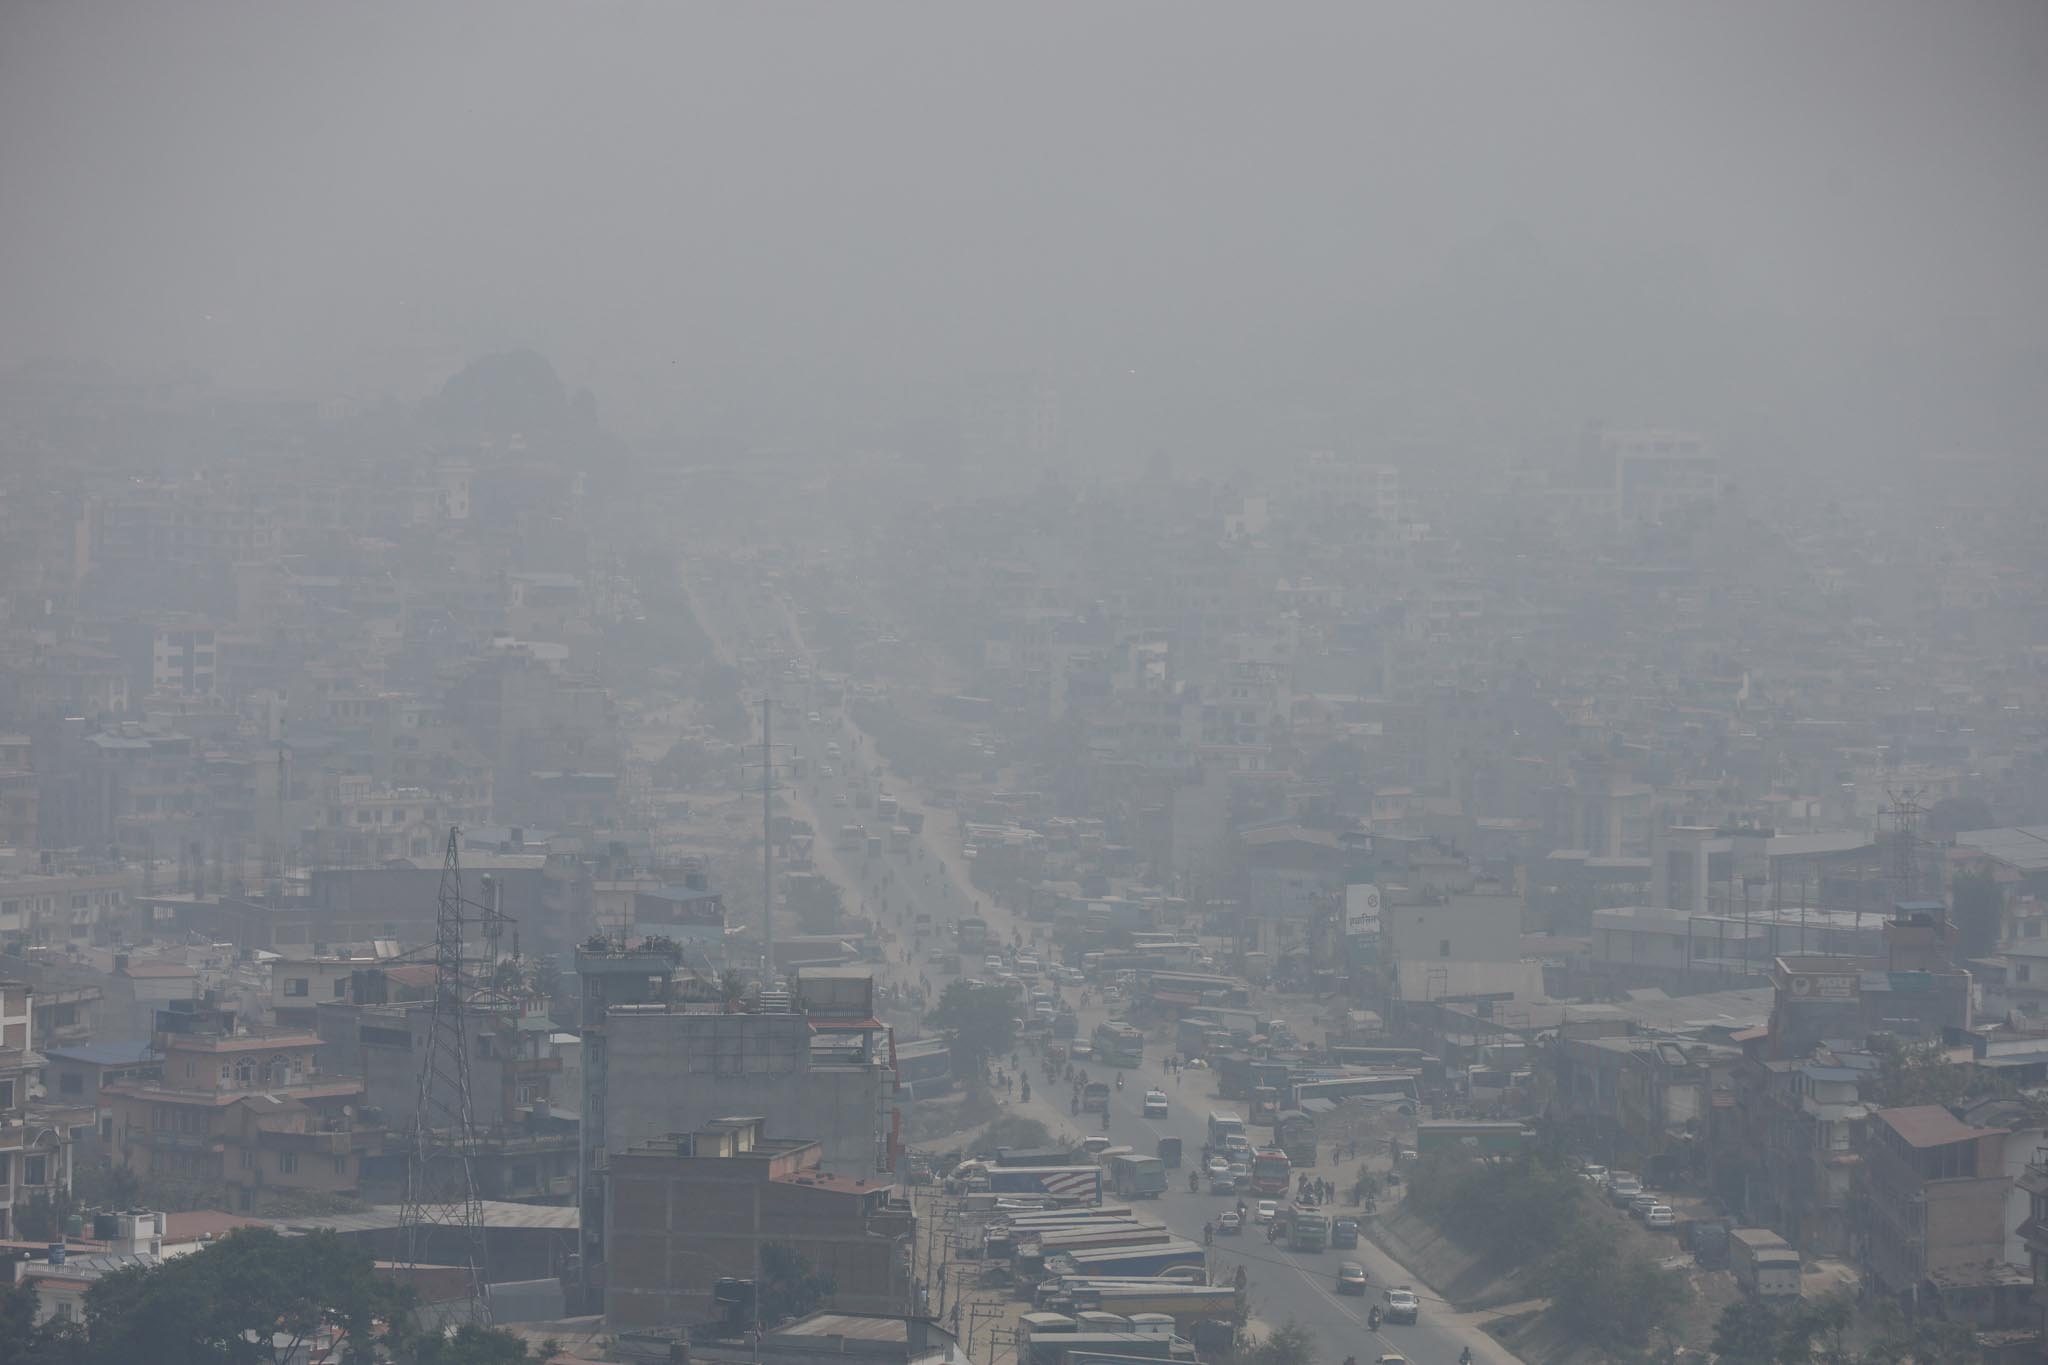 Kathmandu listed world’s third polluted city: stress on containing wildfire